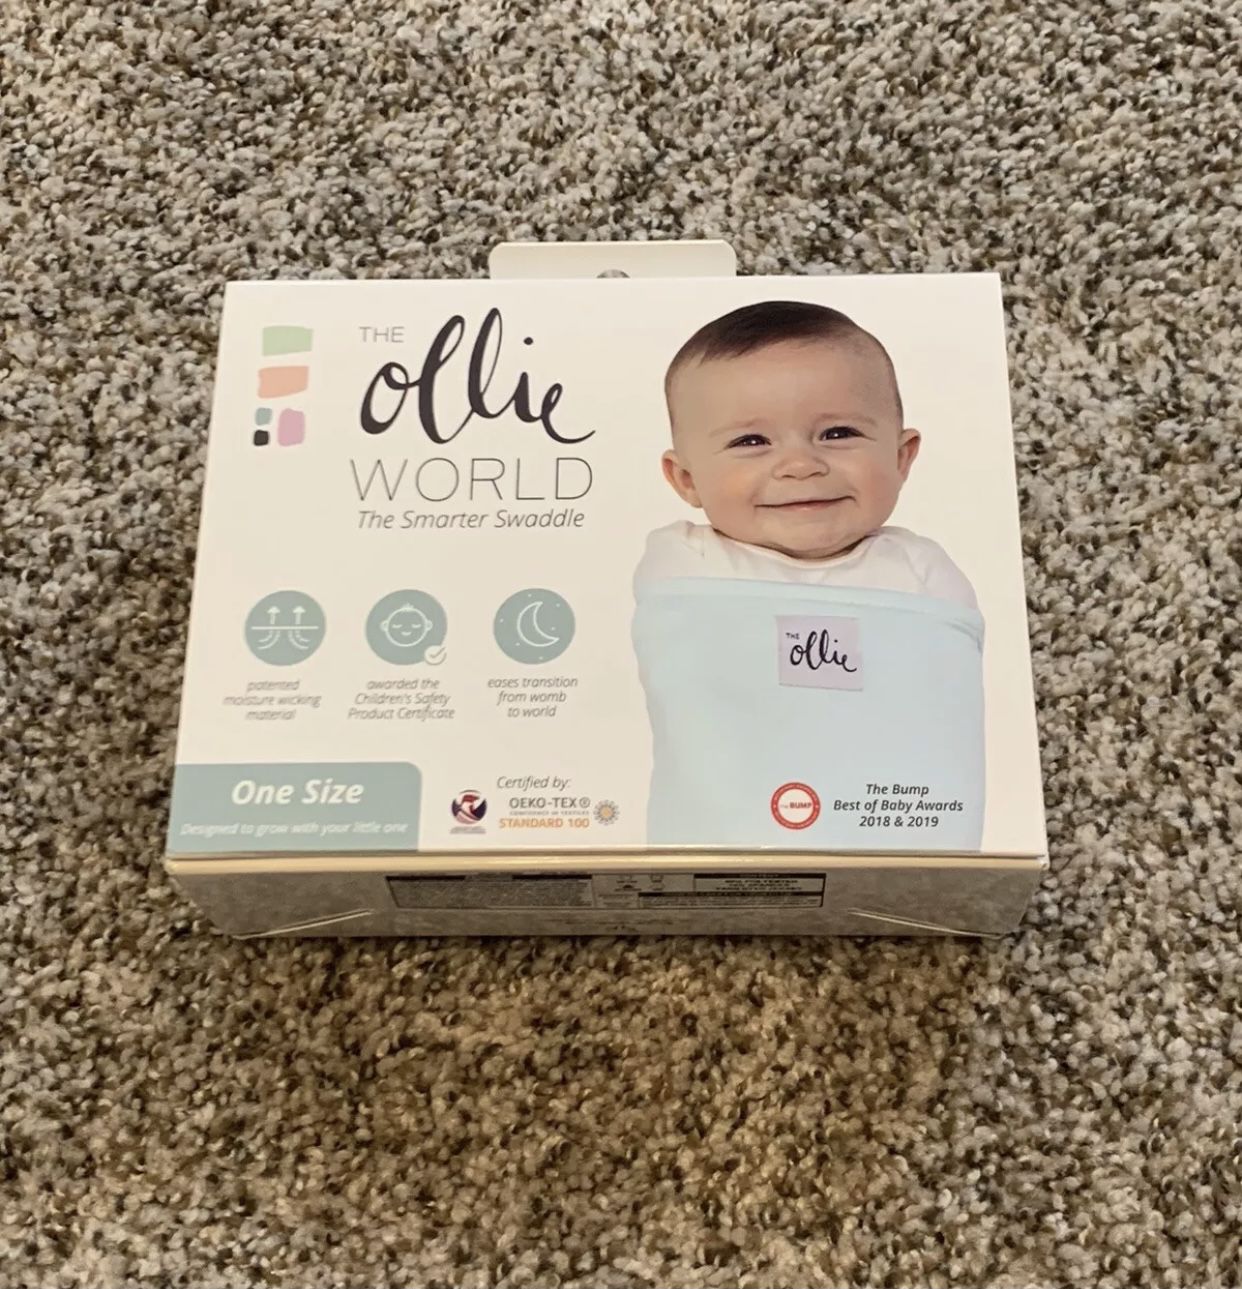 The Ollie World Swaddle Sky - Blue (Brand New) Baby